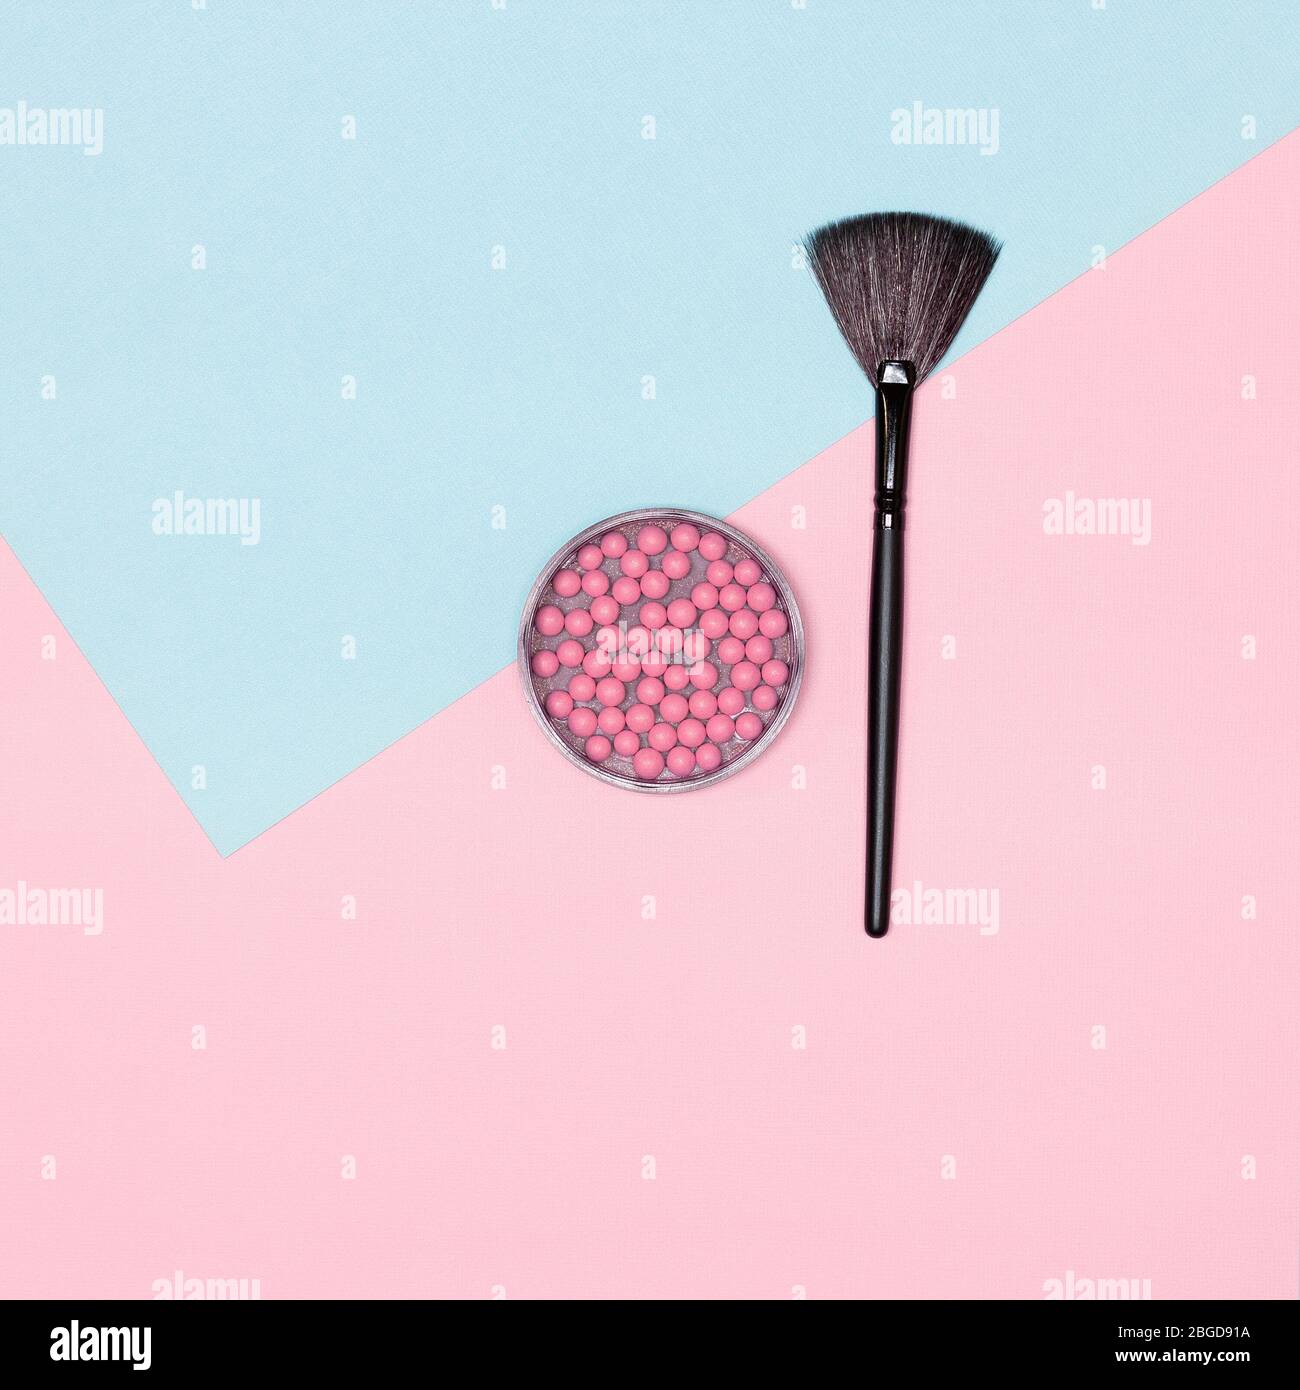 Makeup blush with make-up brush flatlay on pink and blue pastel background Stock Photo